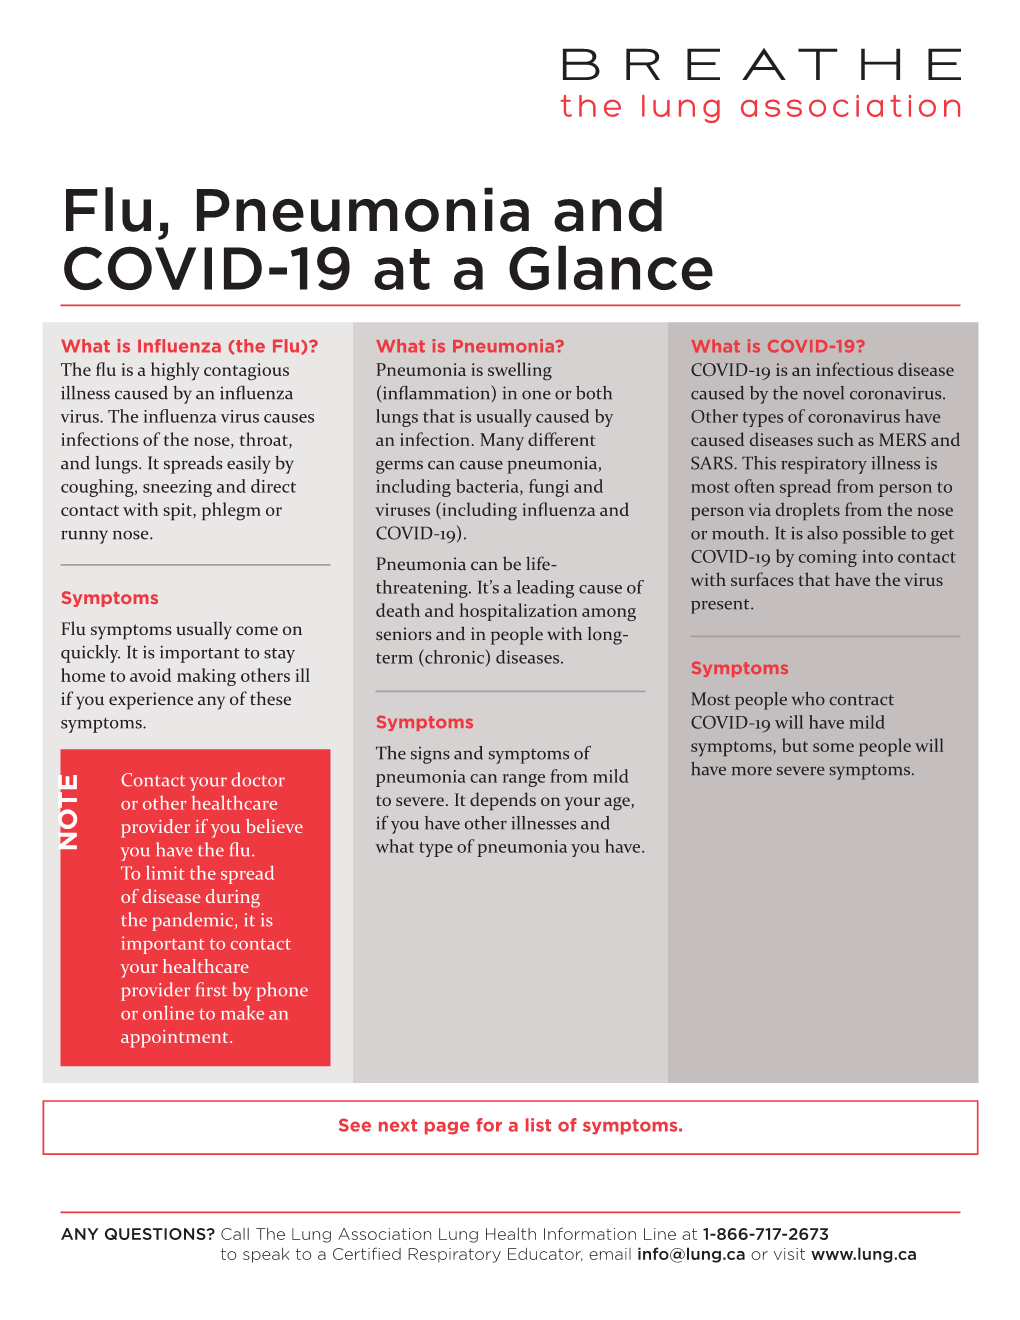 Flu, Pneumonia and COVID-19 at a Glance